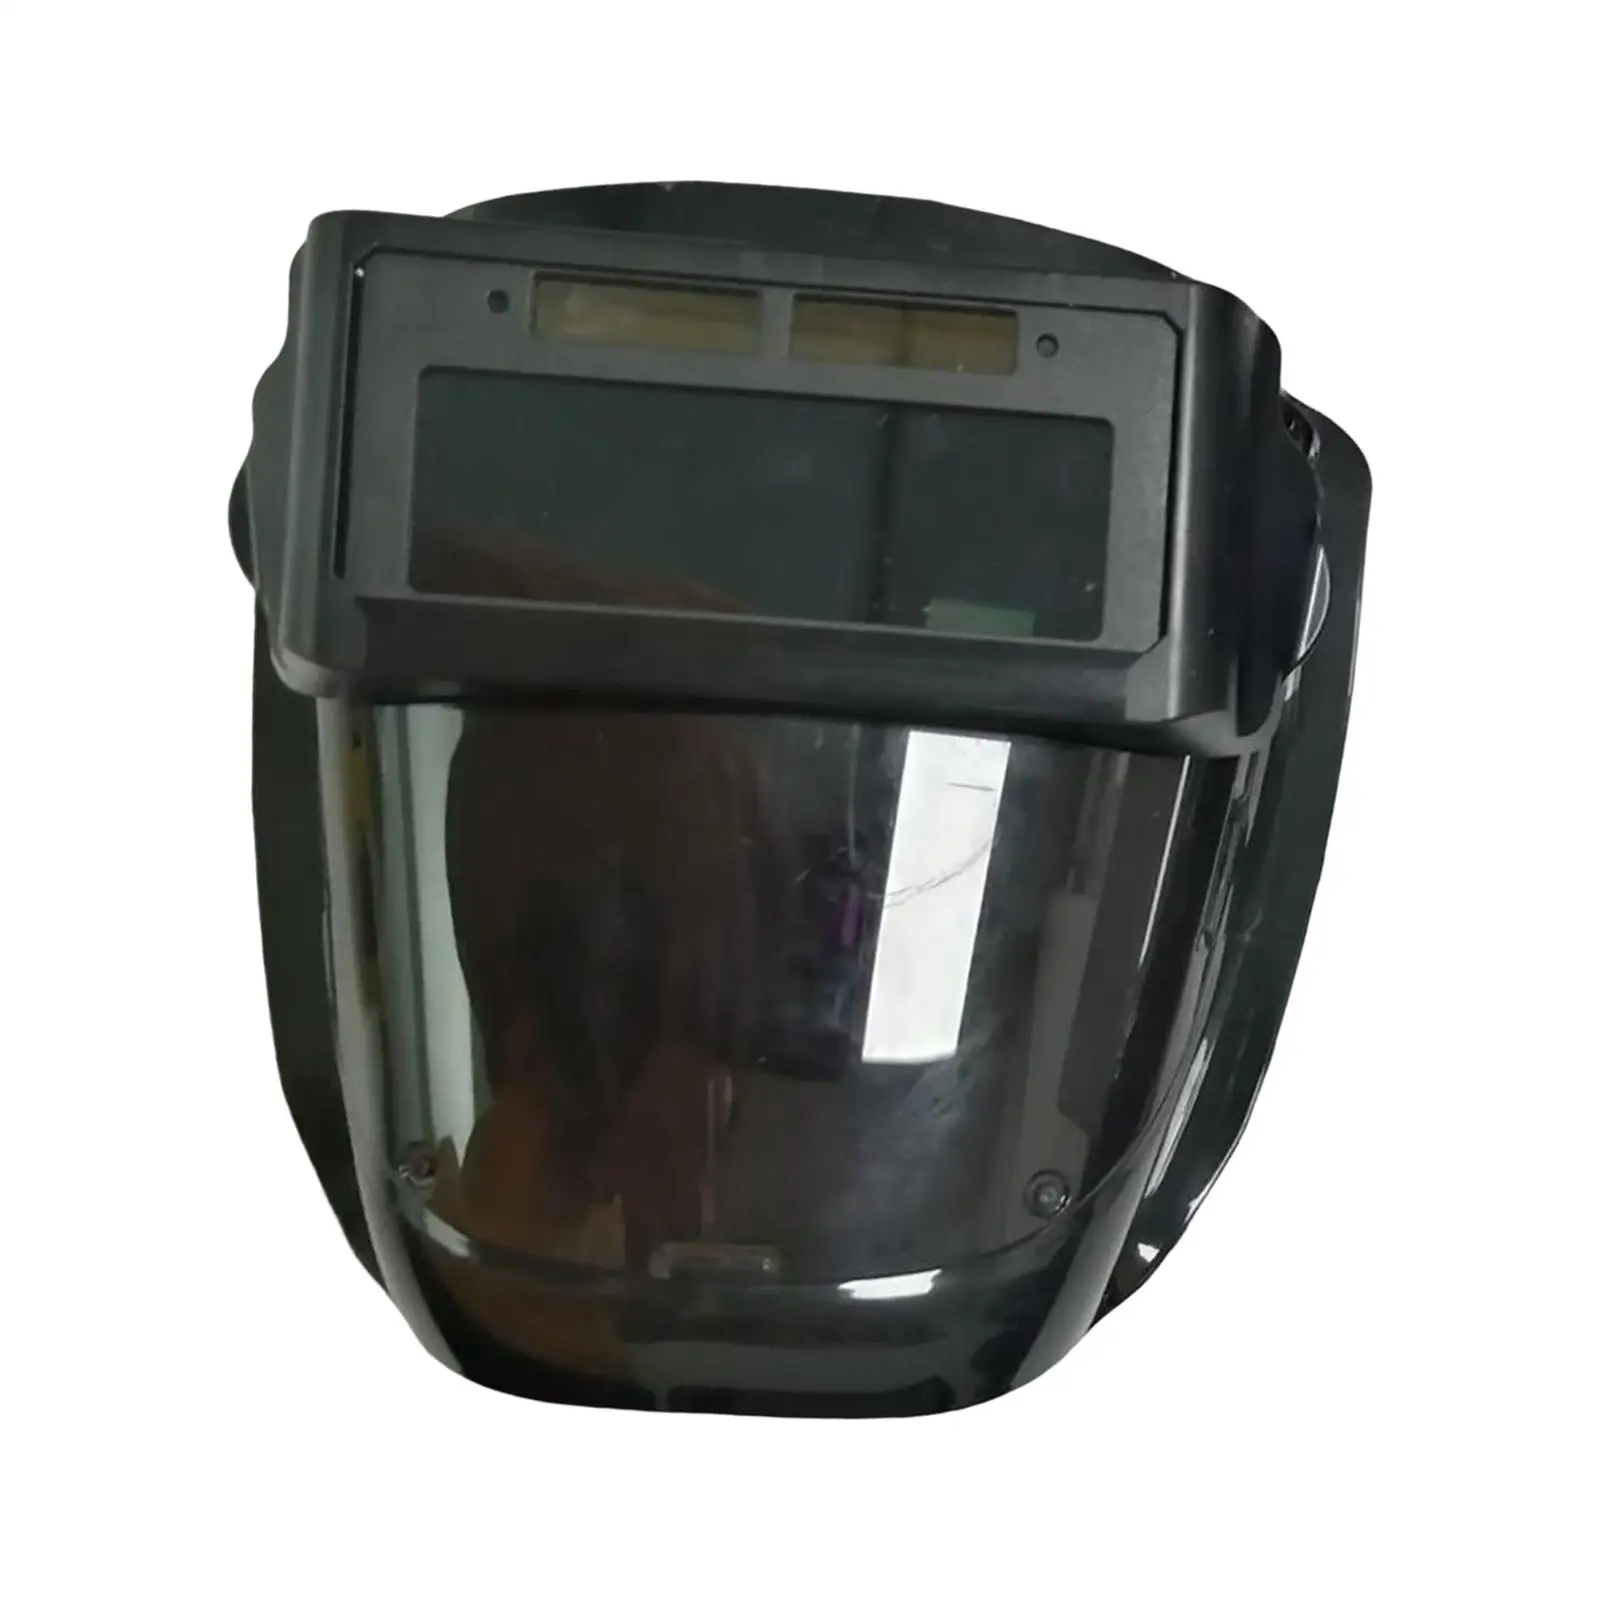 Large Viewing Welding Hood Wide Shade Welding Cover for Outdoor Manufacturing Metal Production Construction Automotive